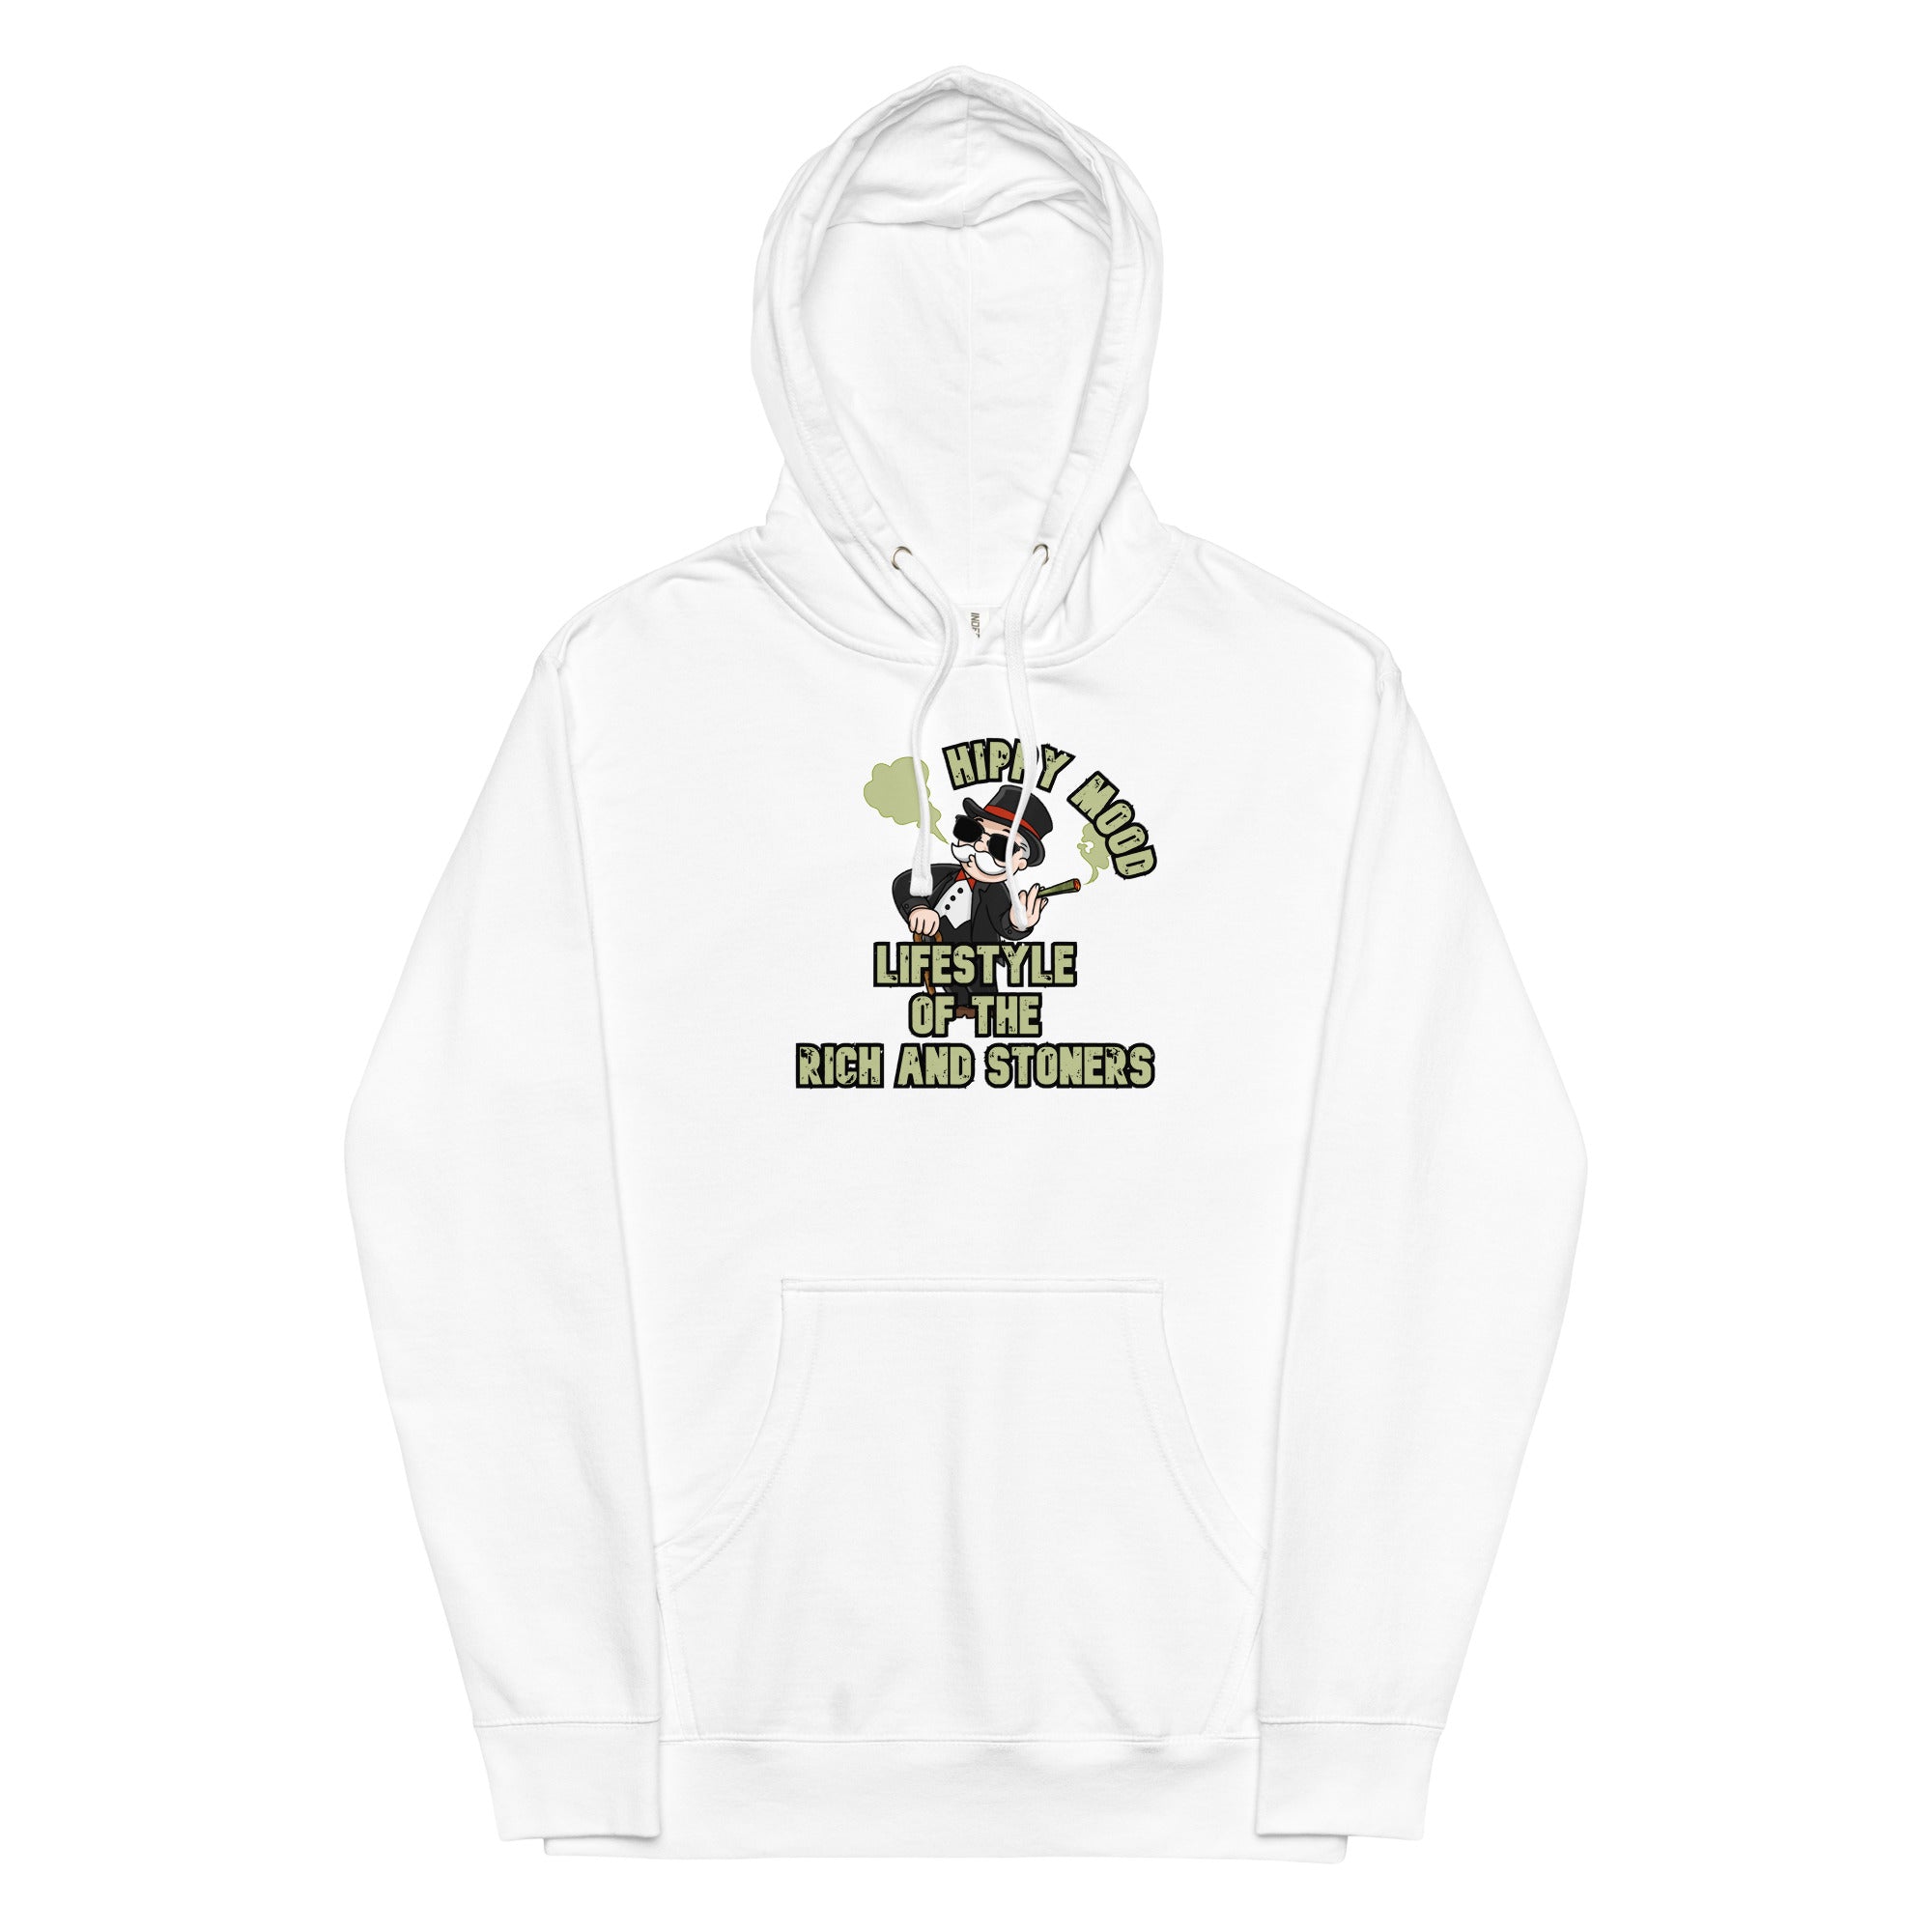 Lifestyle of the Rich and Stoners | Unisex midweight hoodie